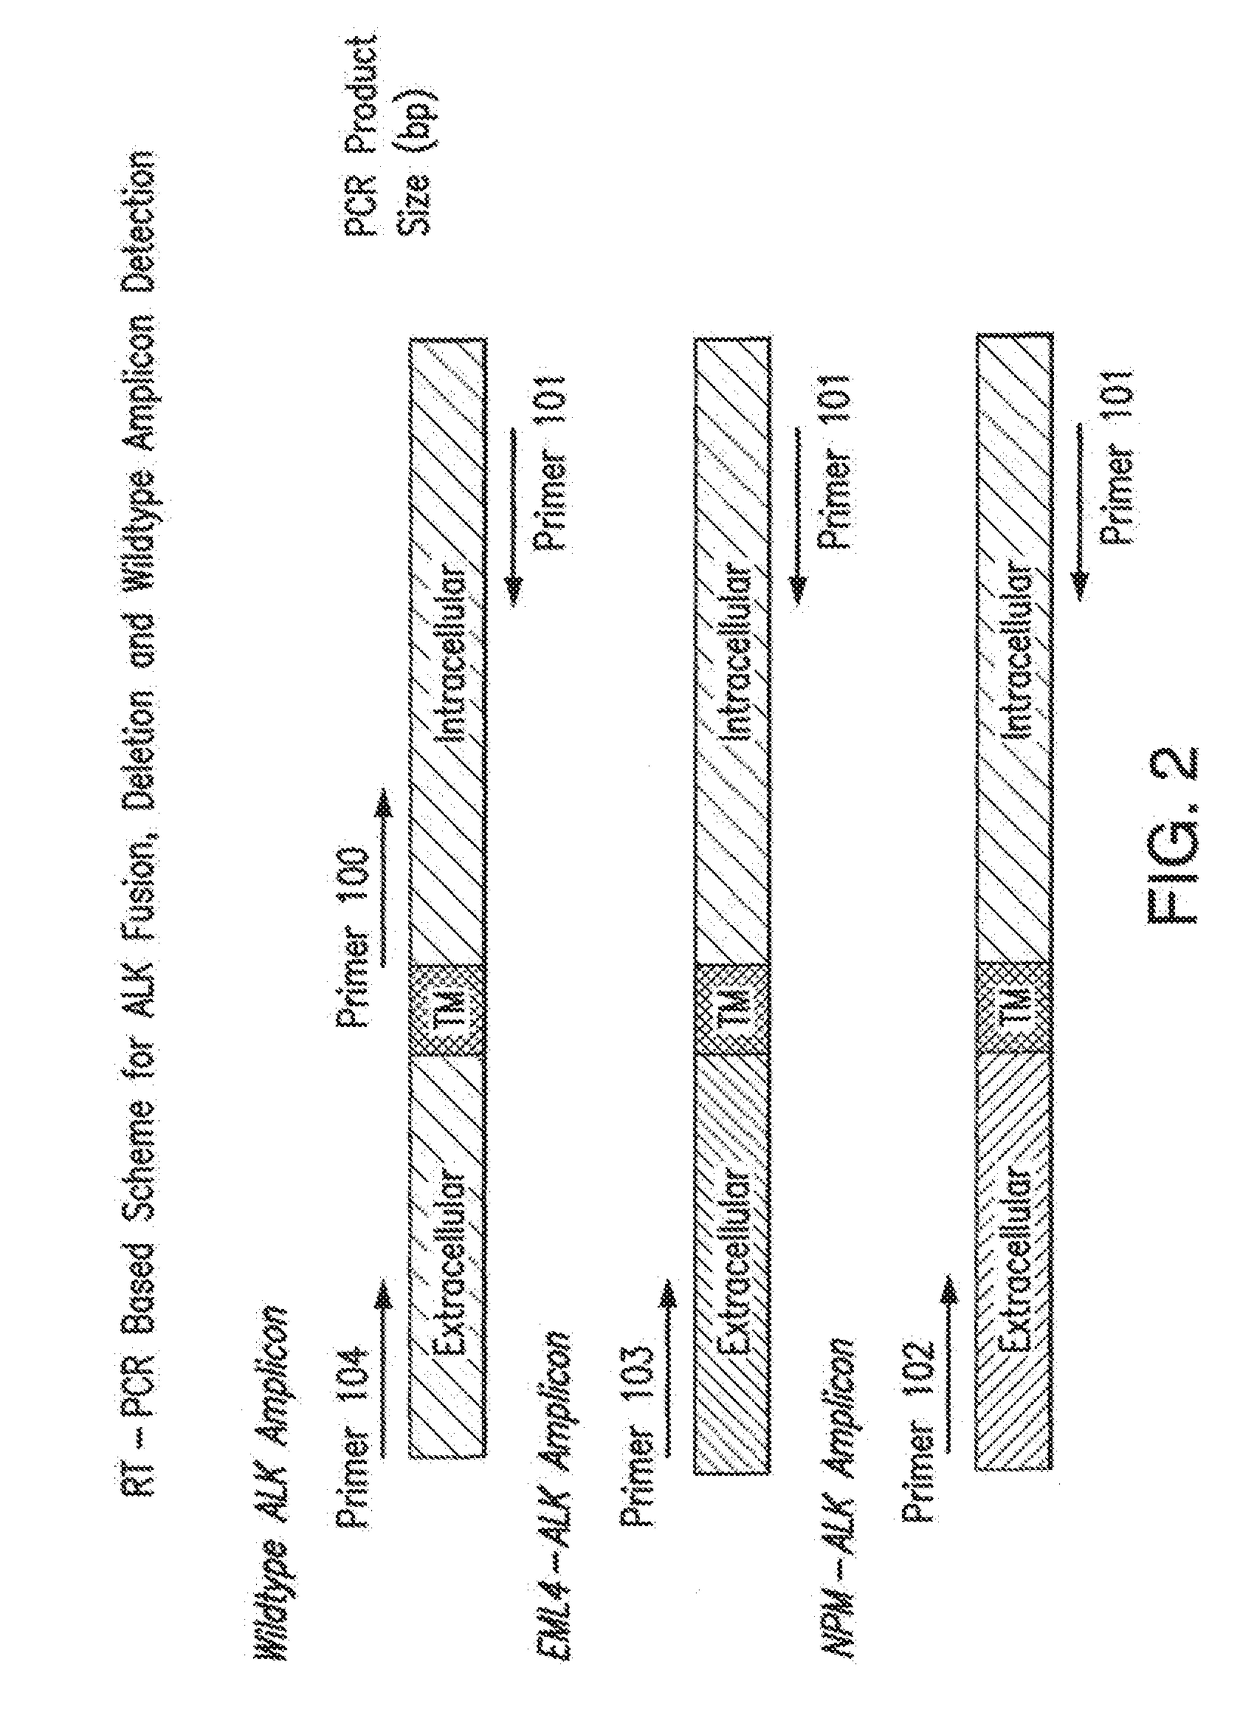 Methods and compositions relating to fusions of alk for diagnosing and treating cancer